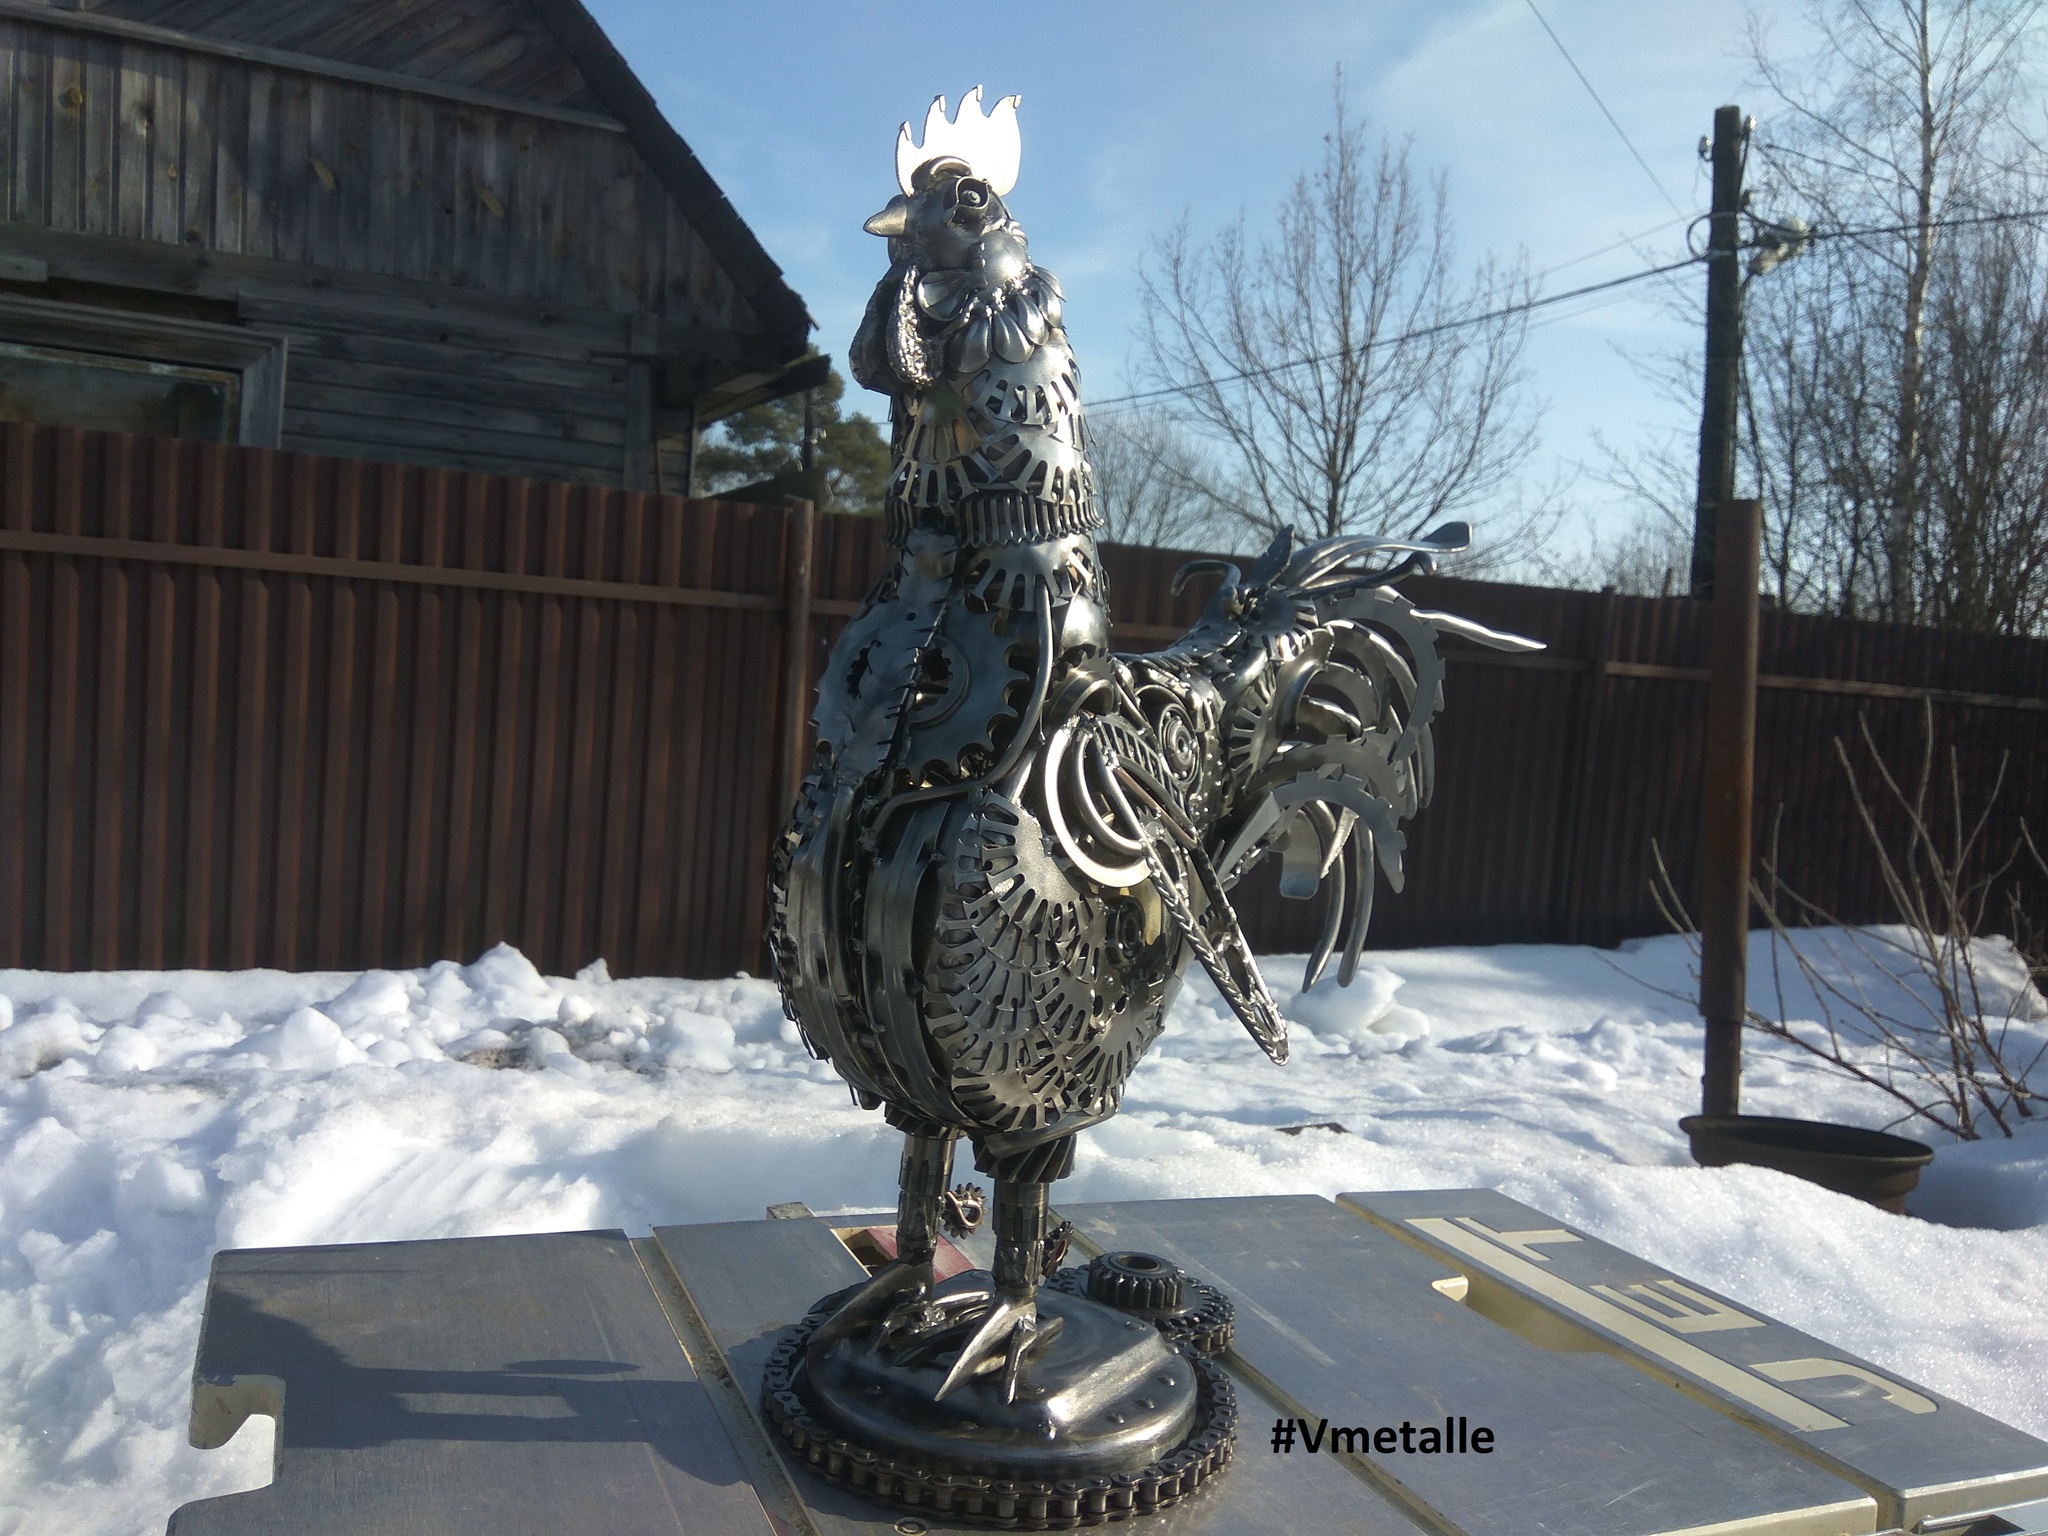 Rooster.Sculpture made of scrap metal and spare parts - , Longpost, Youtube, Video, Cock-a-doodle-doo, Fence, The sun, Village, Feathers, Wings, Birds, Mechanism, Gallery, Exhibition, Decor, Rooster, Creative, Creation, Resiklart, Welding, Needlework with process